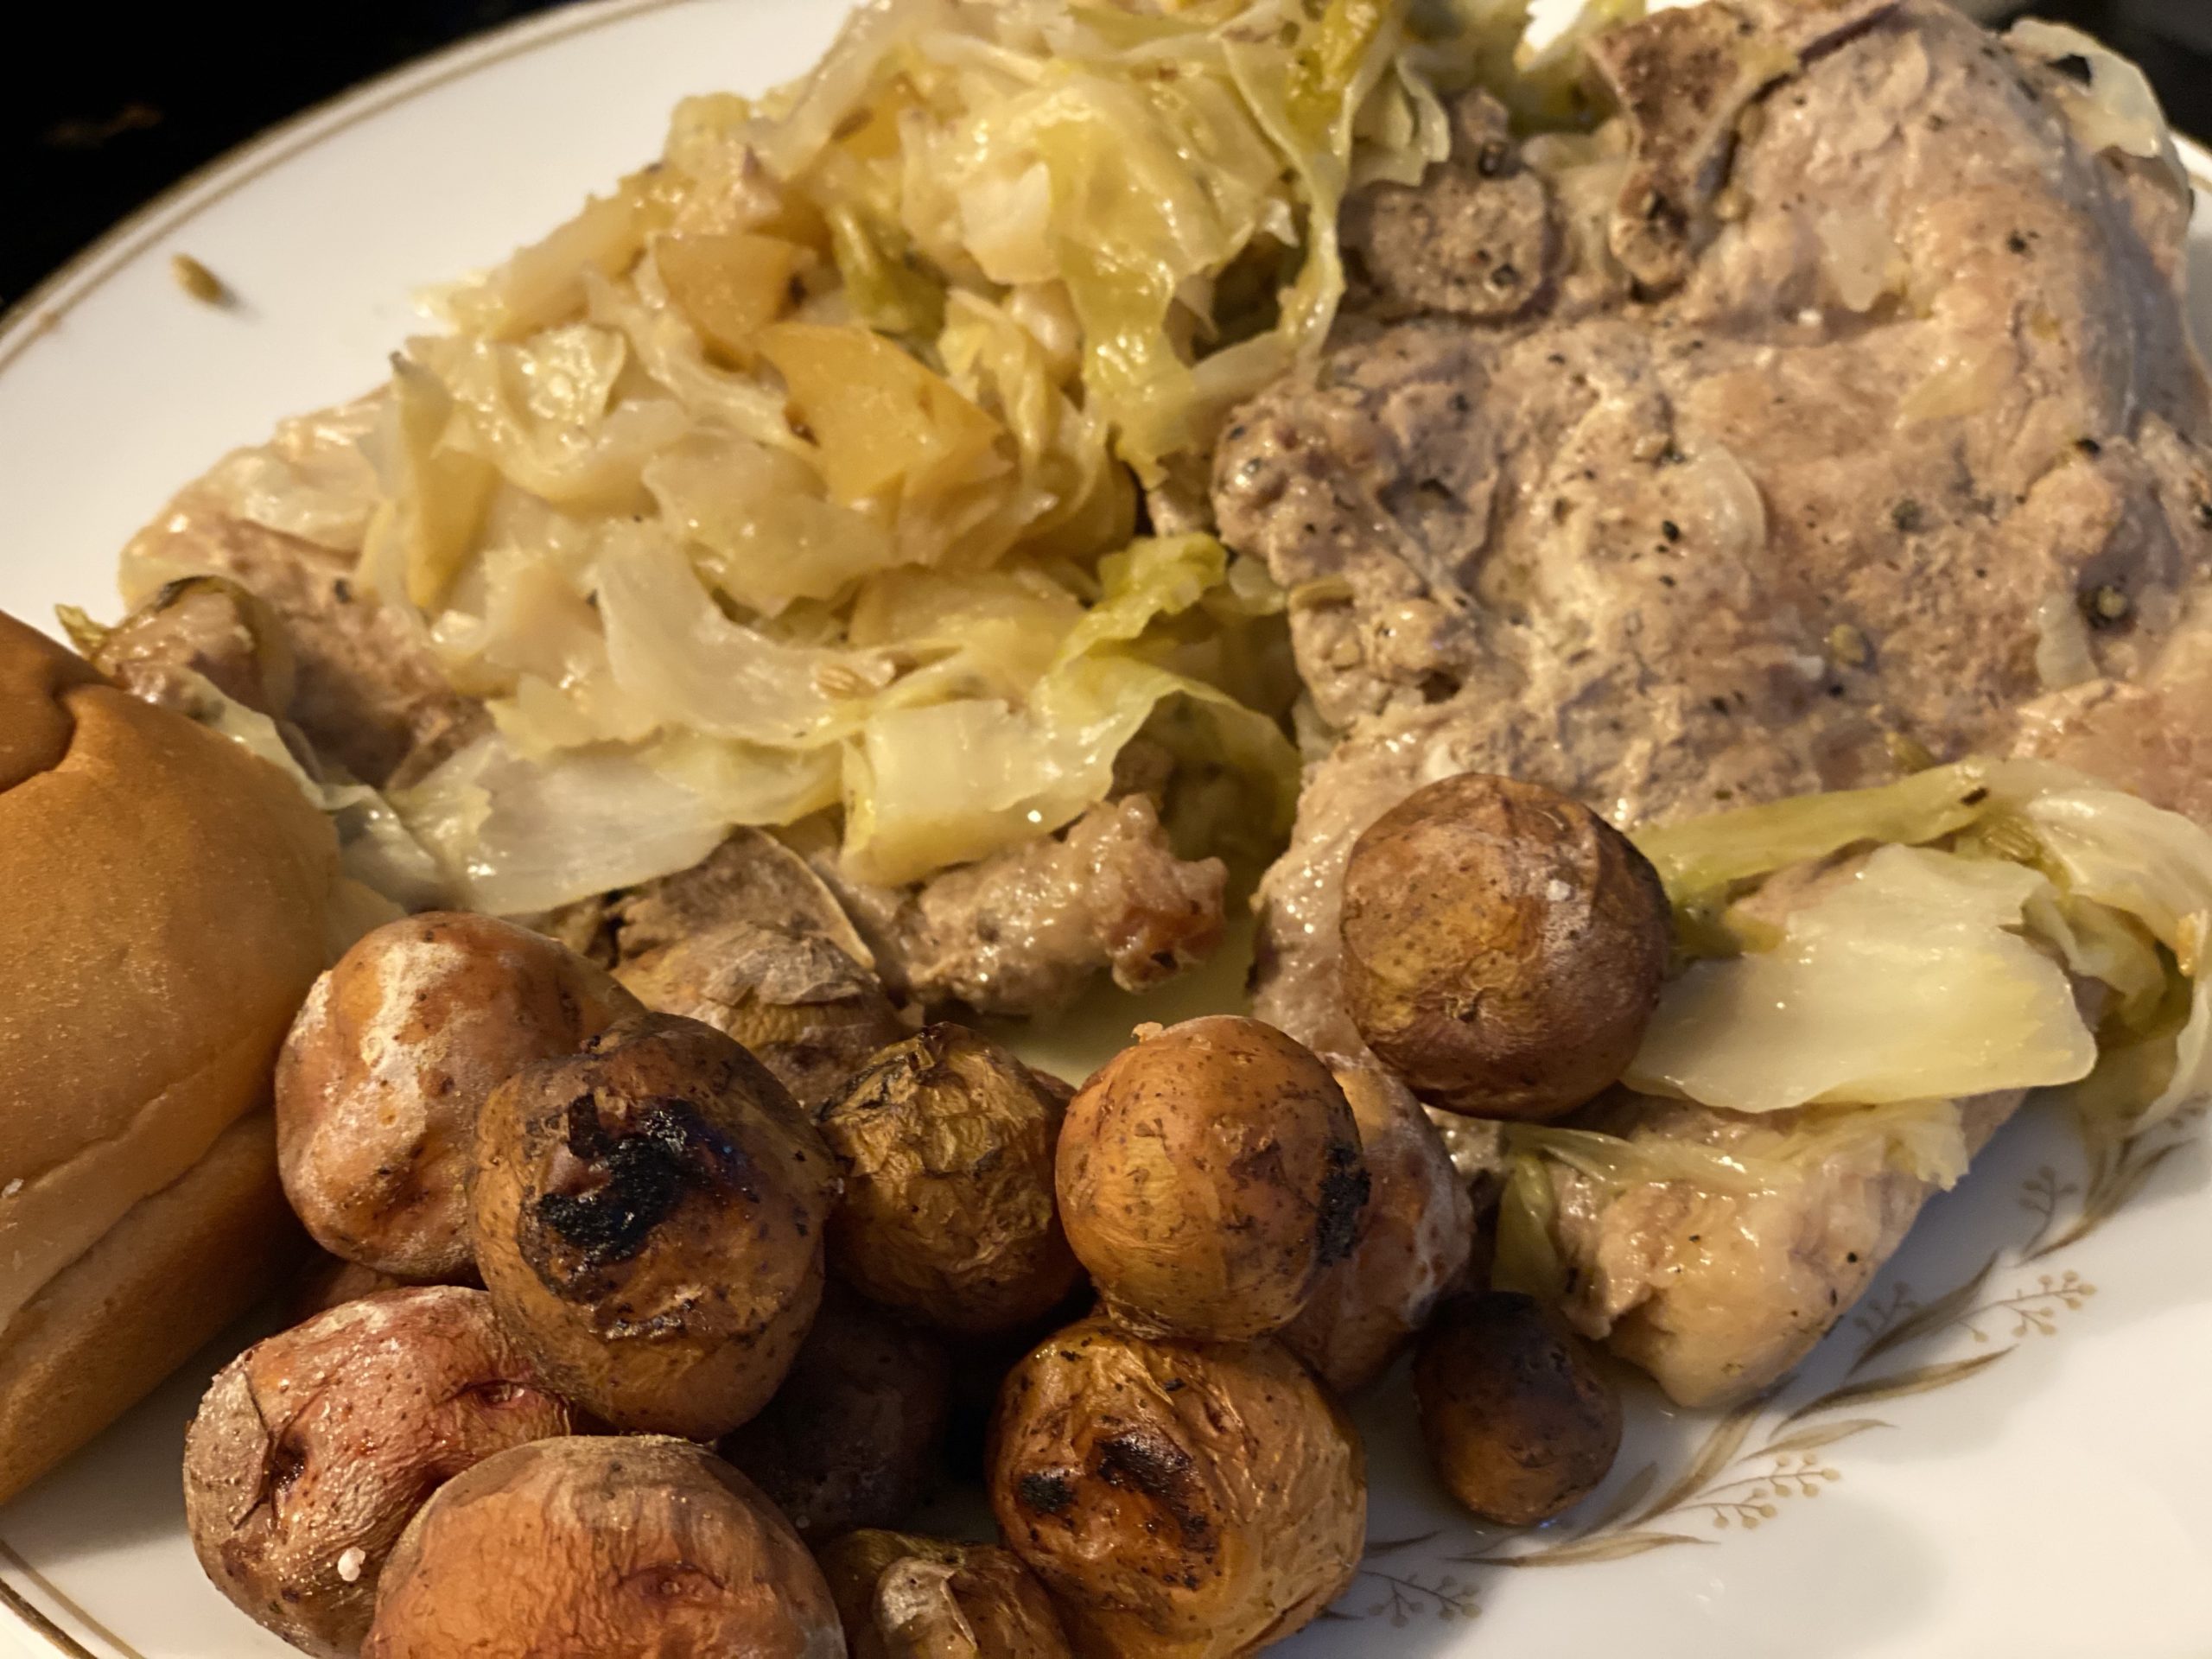 Locally Grown Eats: Cabbage, Apples, & Chops